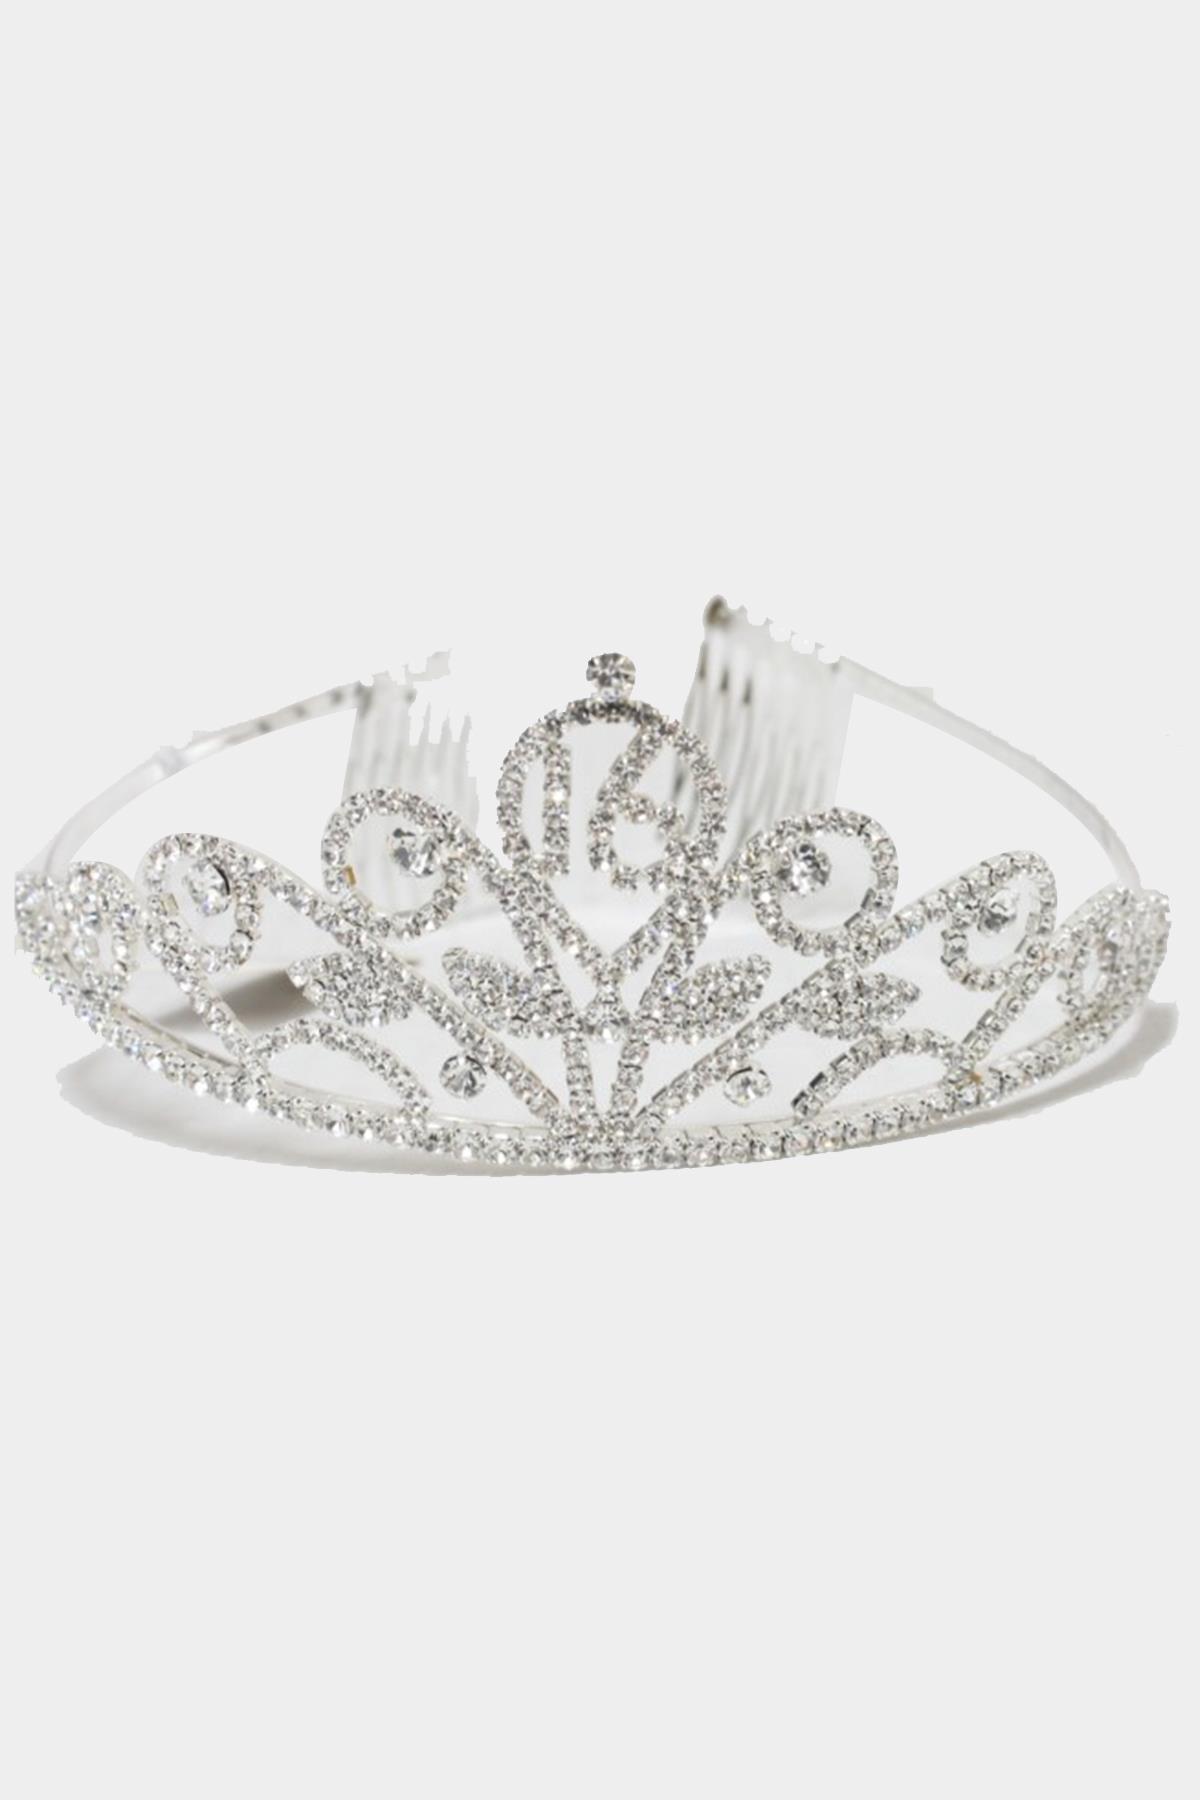 CRYSTAL STONE ACCENTED CROWN TIARA